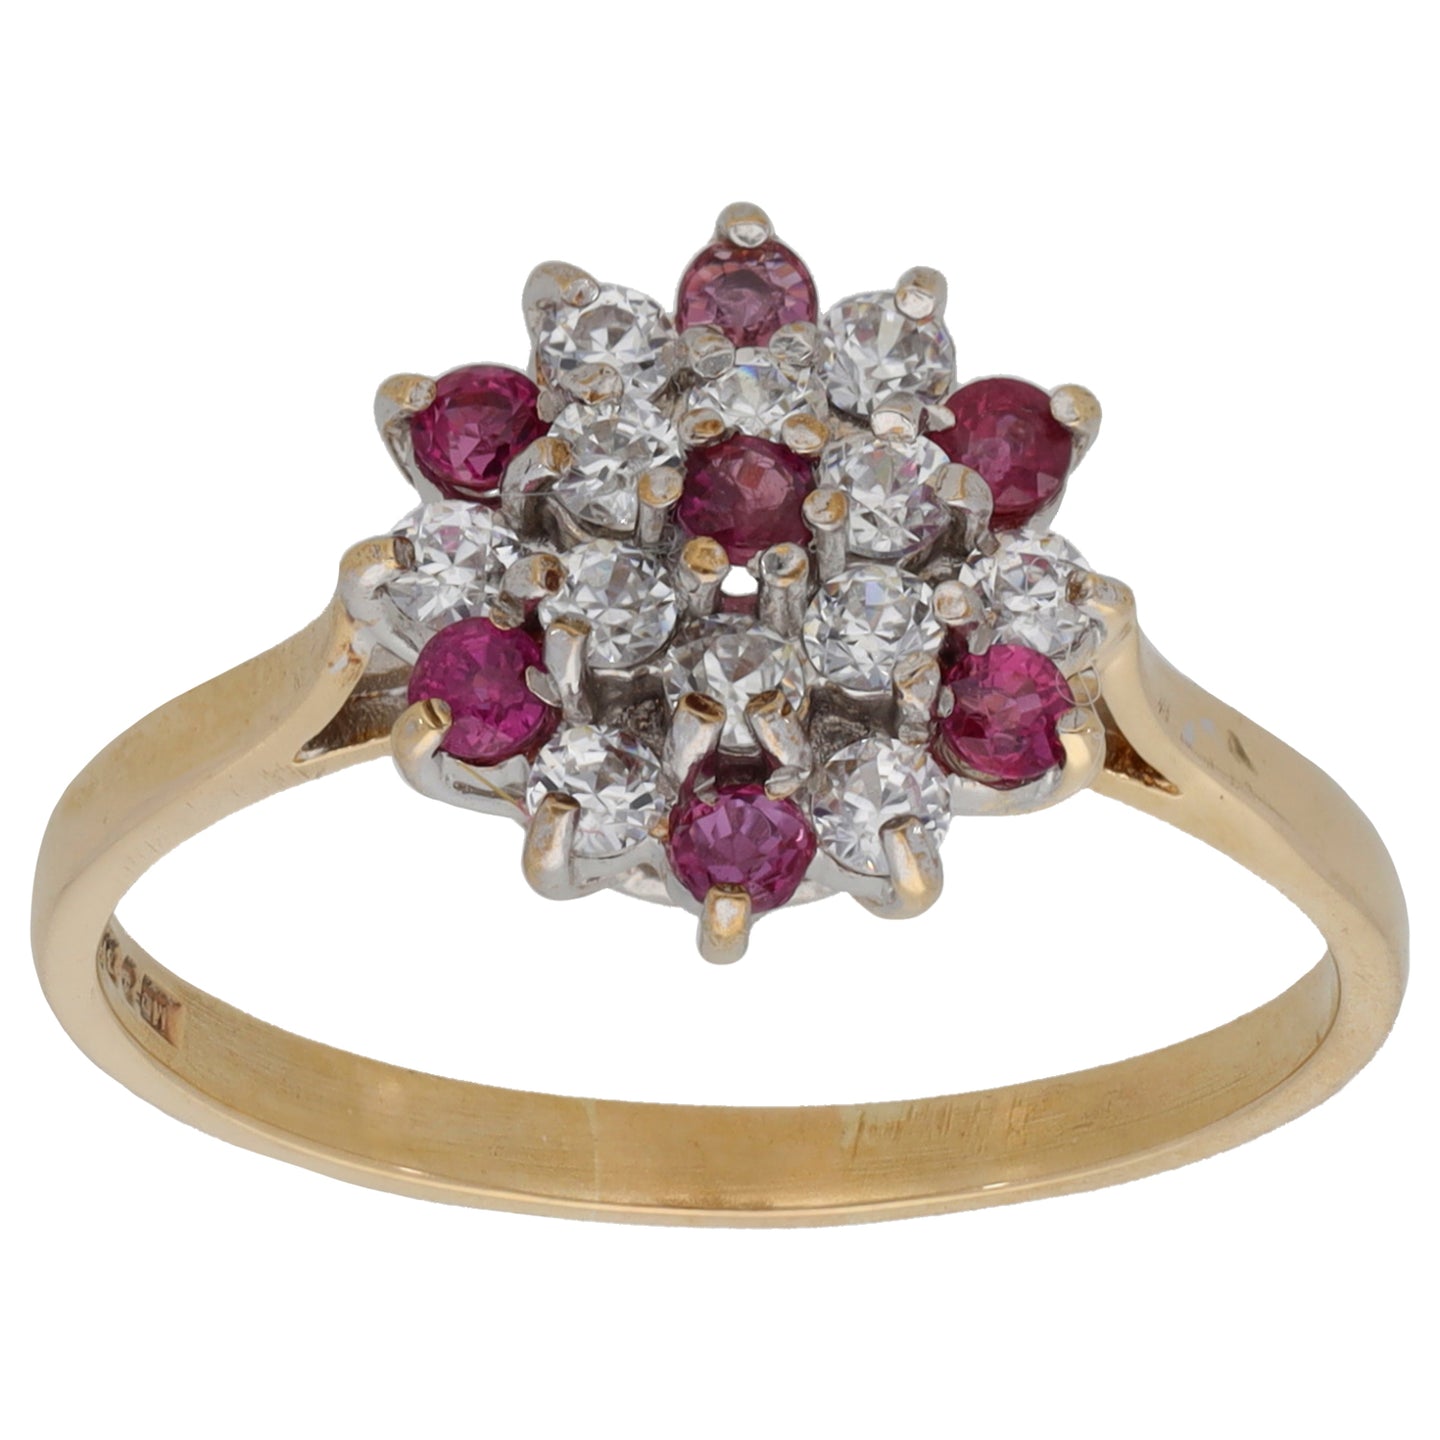 9ct Gold Ruby & Cubic Zirconia Cluster Ring Size Q